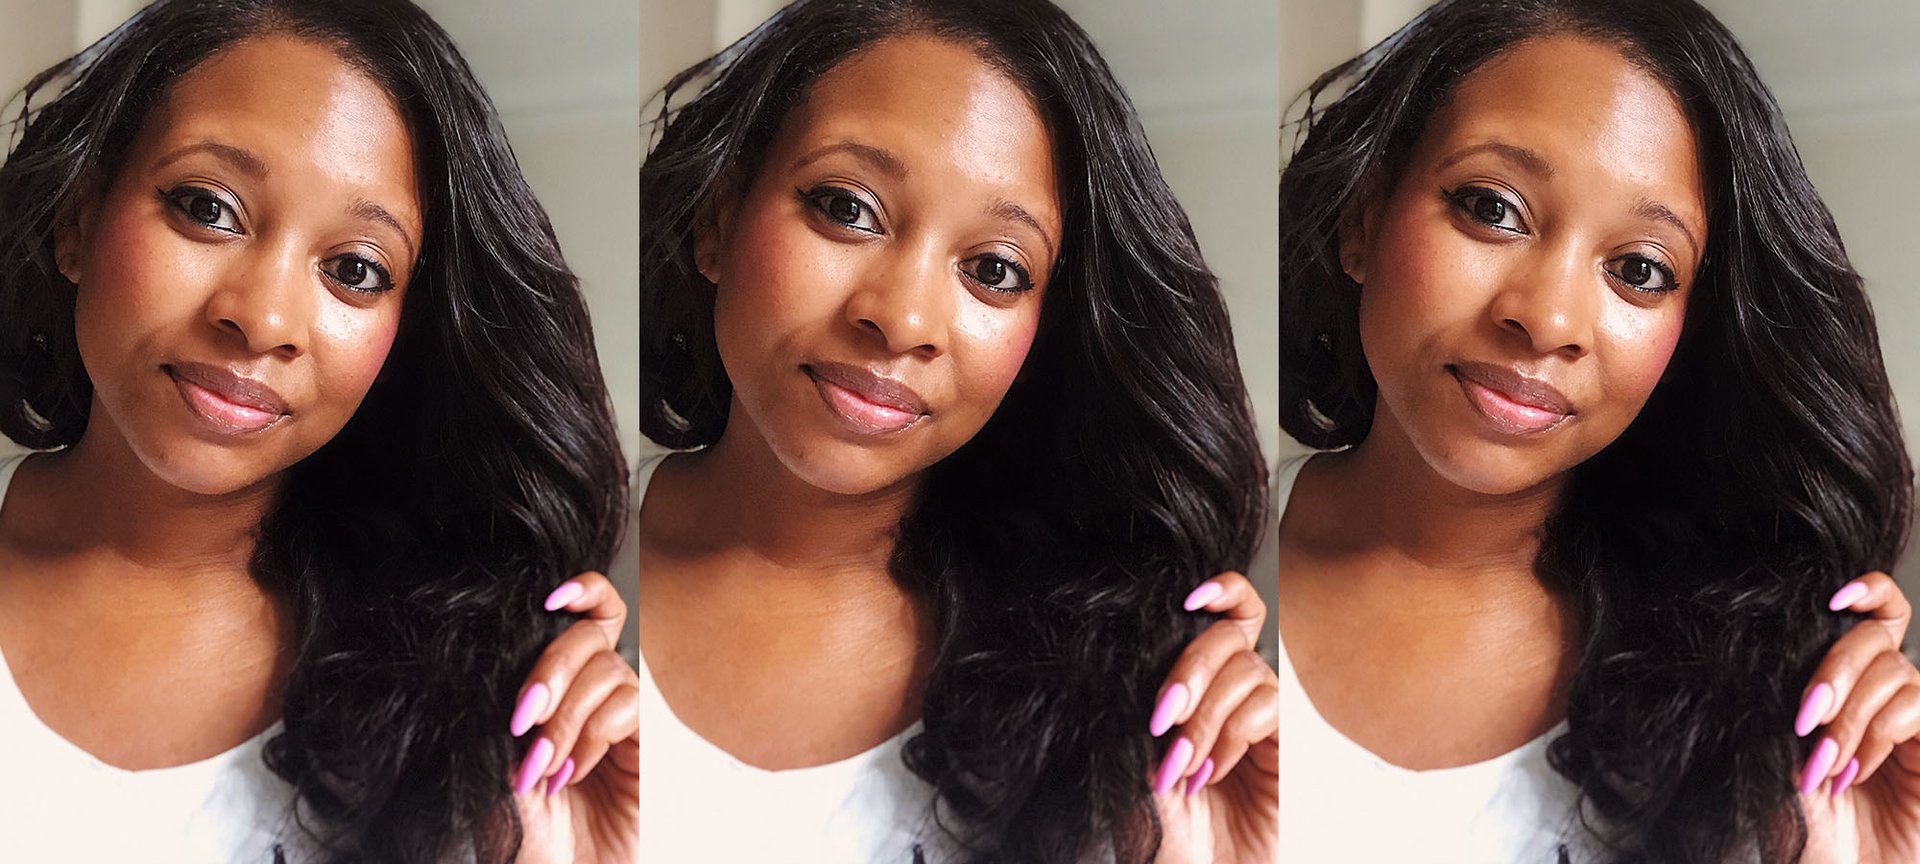 7 Styling Tips For Thick Hair - L'Oréal Paris